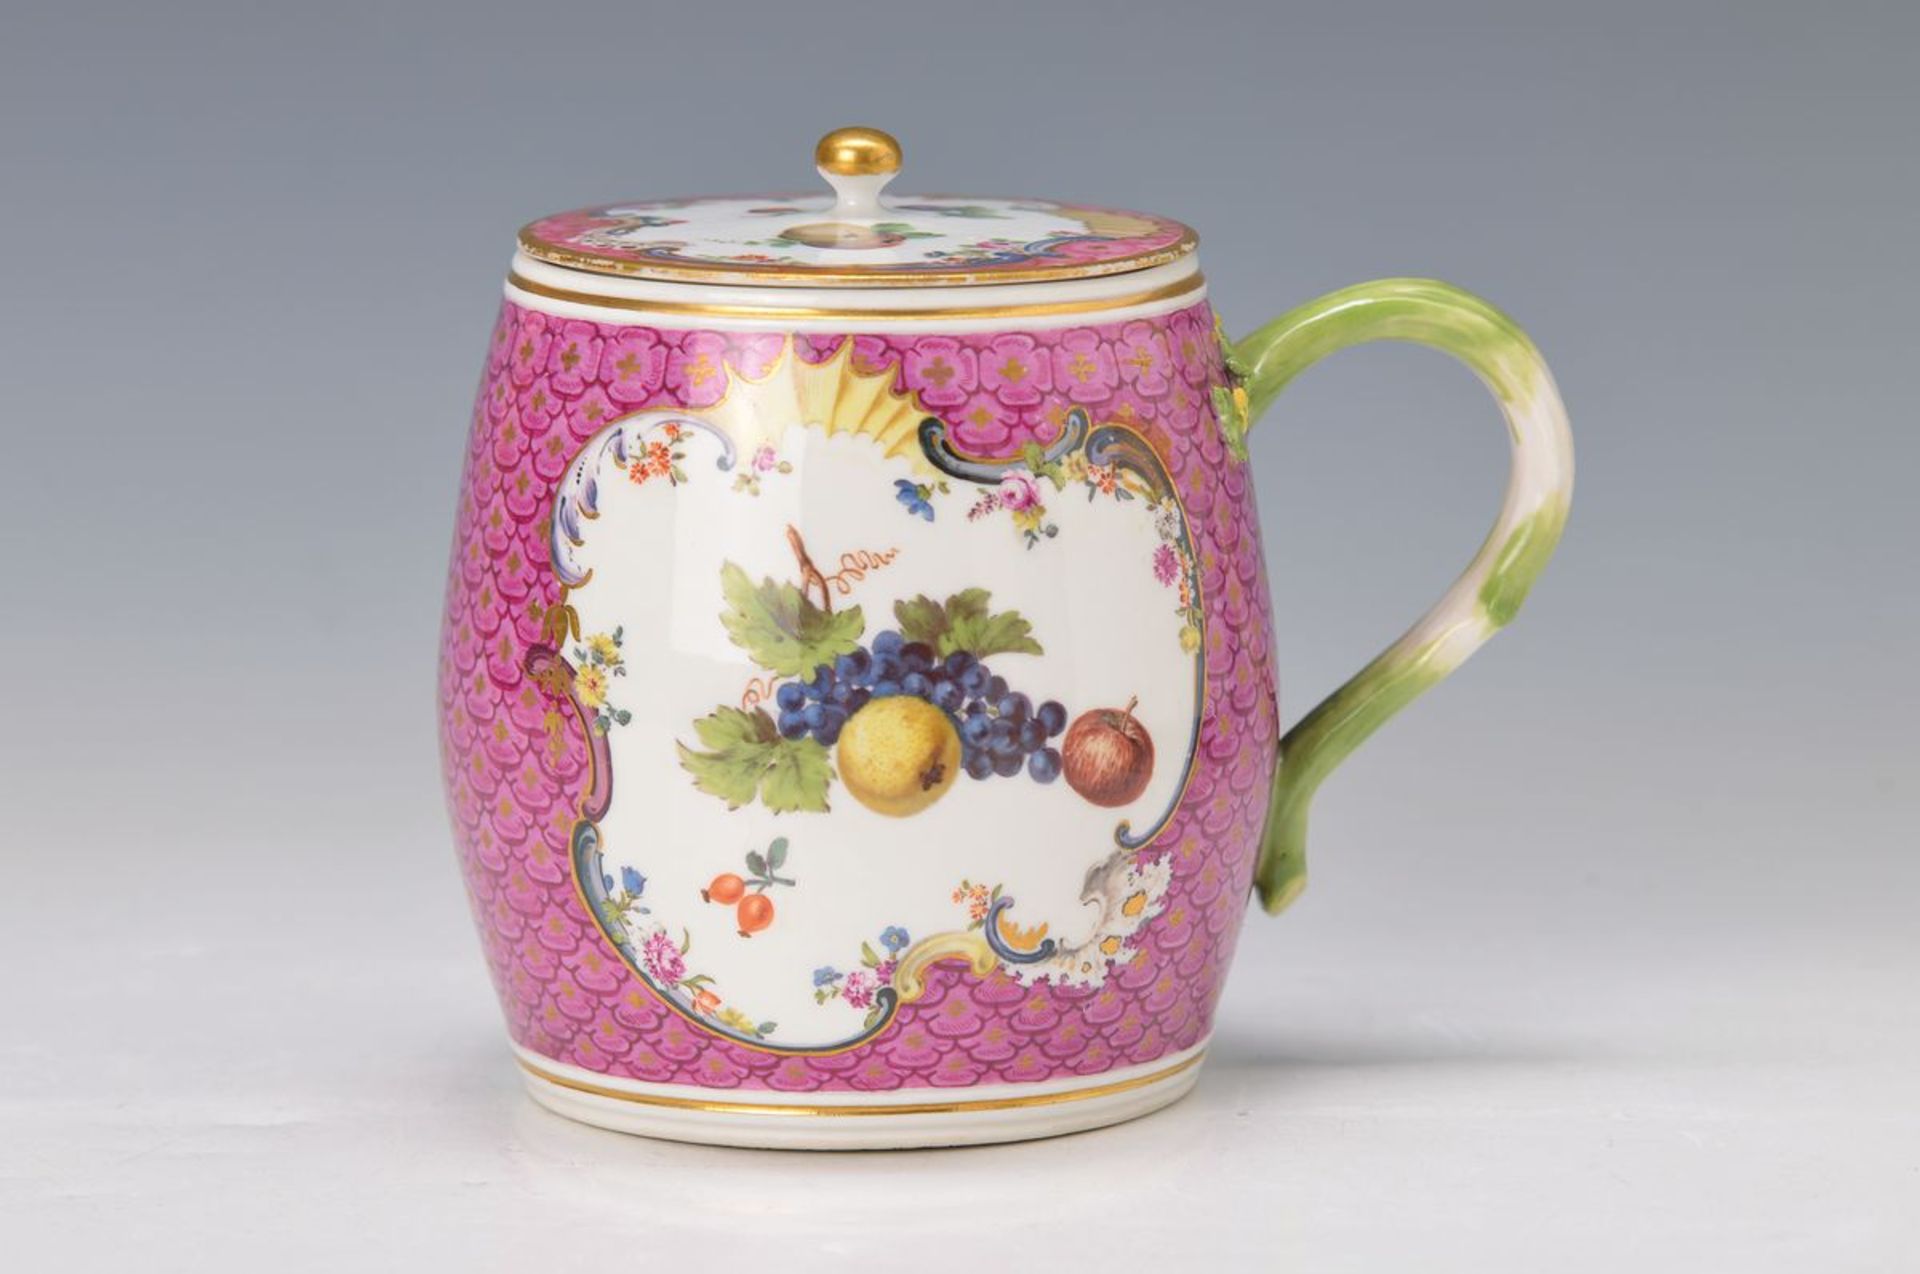 tankard, Meissen, around 1750, ruby red scalesdecor encircling gold heightened, in two cartridges